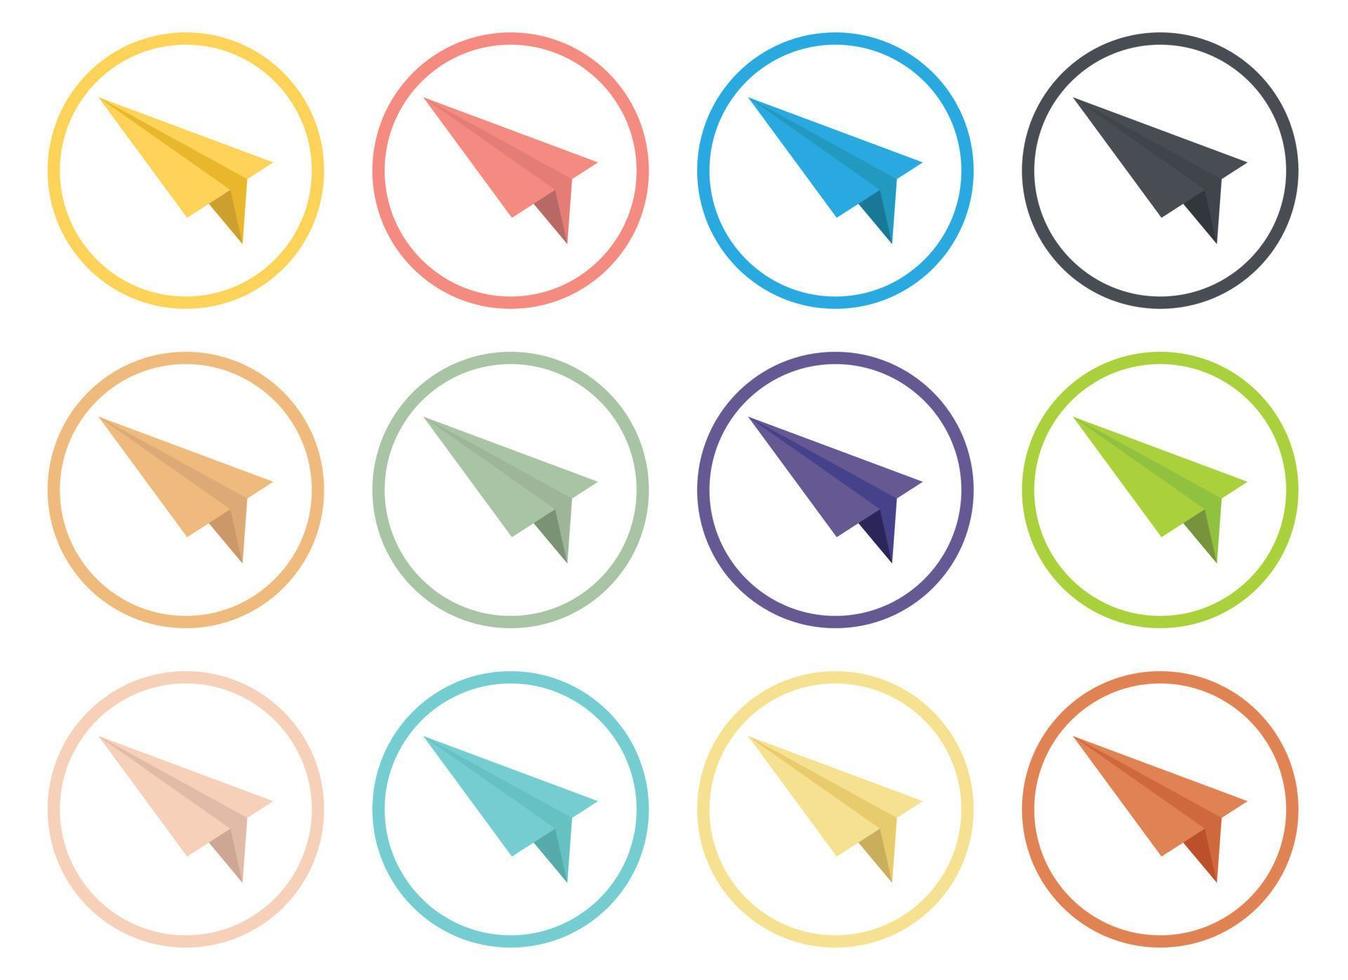 Paper plane icon collection vector illustration isolated on white